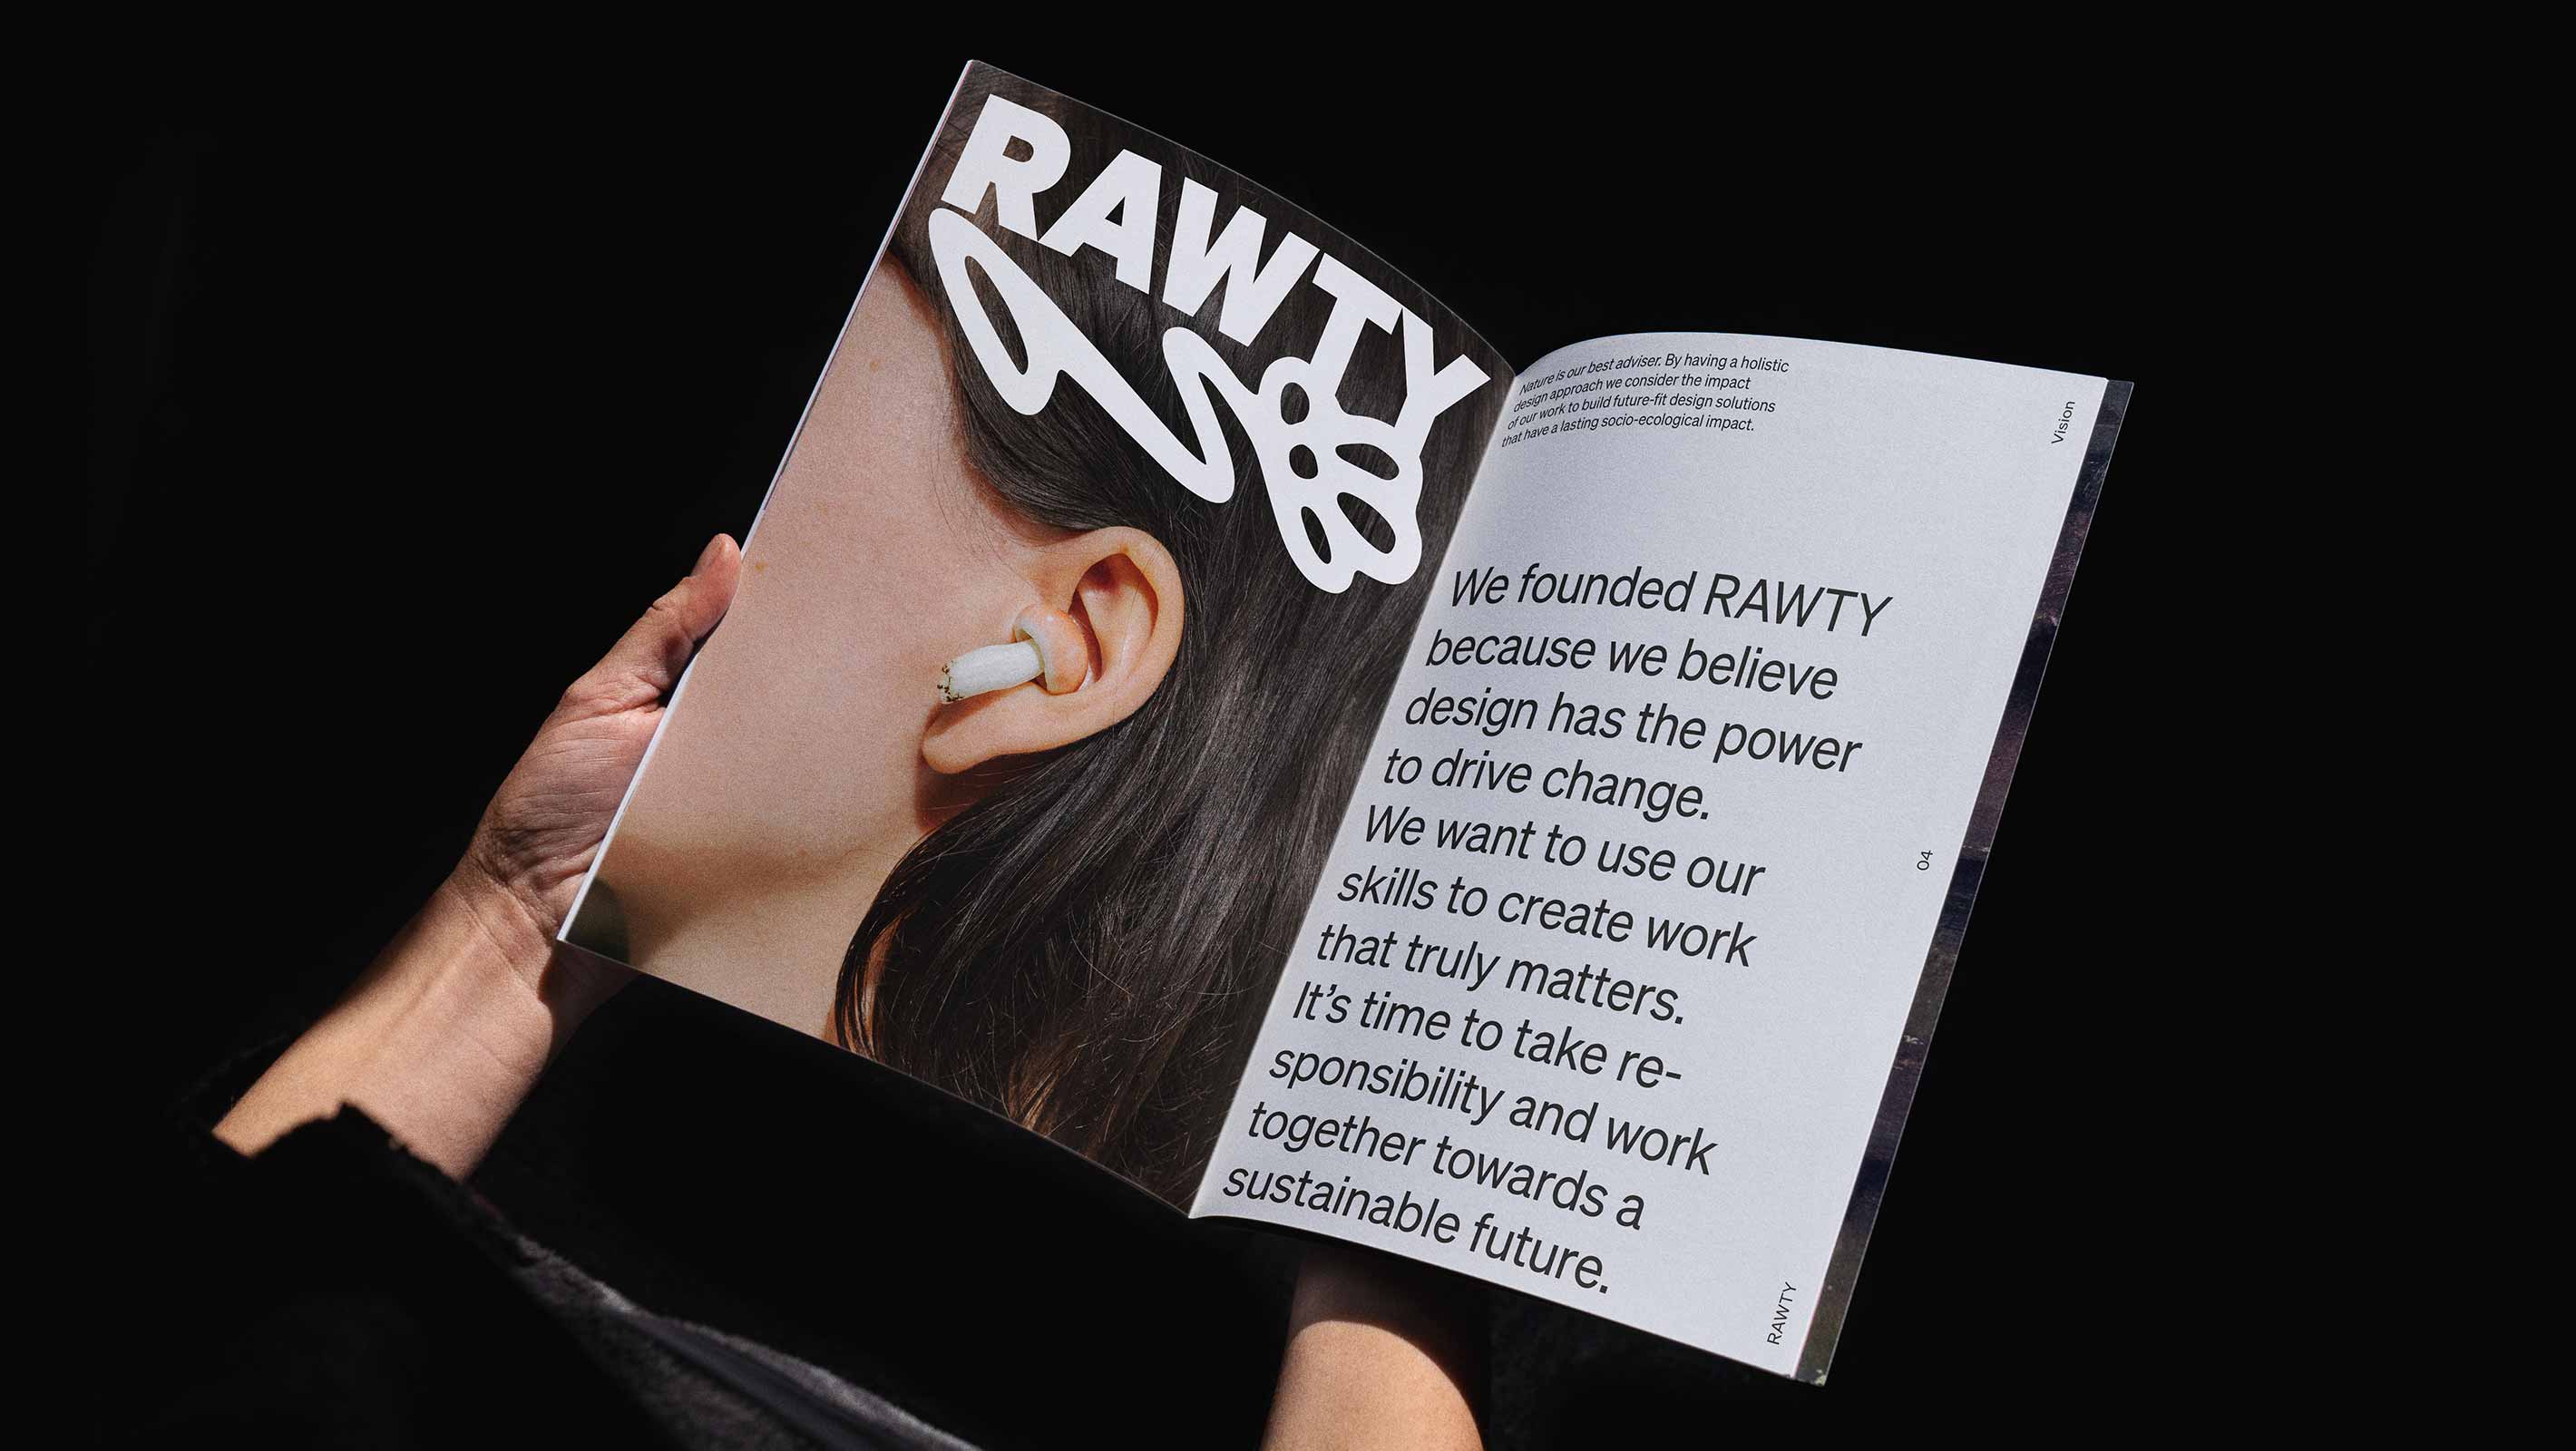 Two hands holding a magazine with an open spread where the left page shows a close-up photo of a woman with black hair and a small mushroom in her ear looking like a bluetooth headphone with the RAWTY logo over the photo at the top and the other side showing text about why we founded RAWTY.